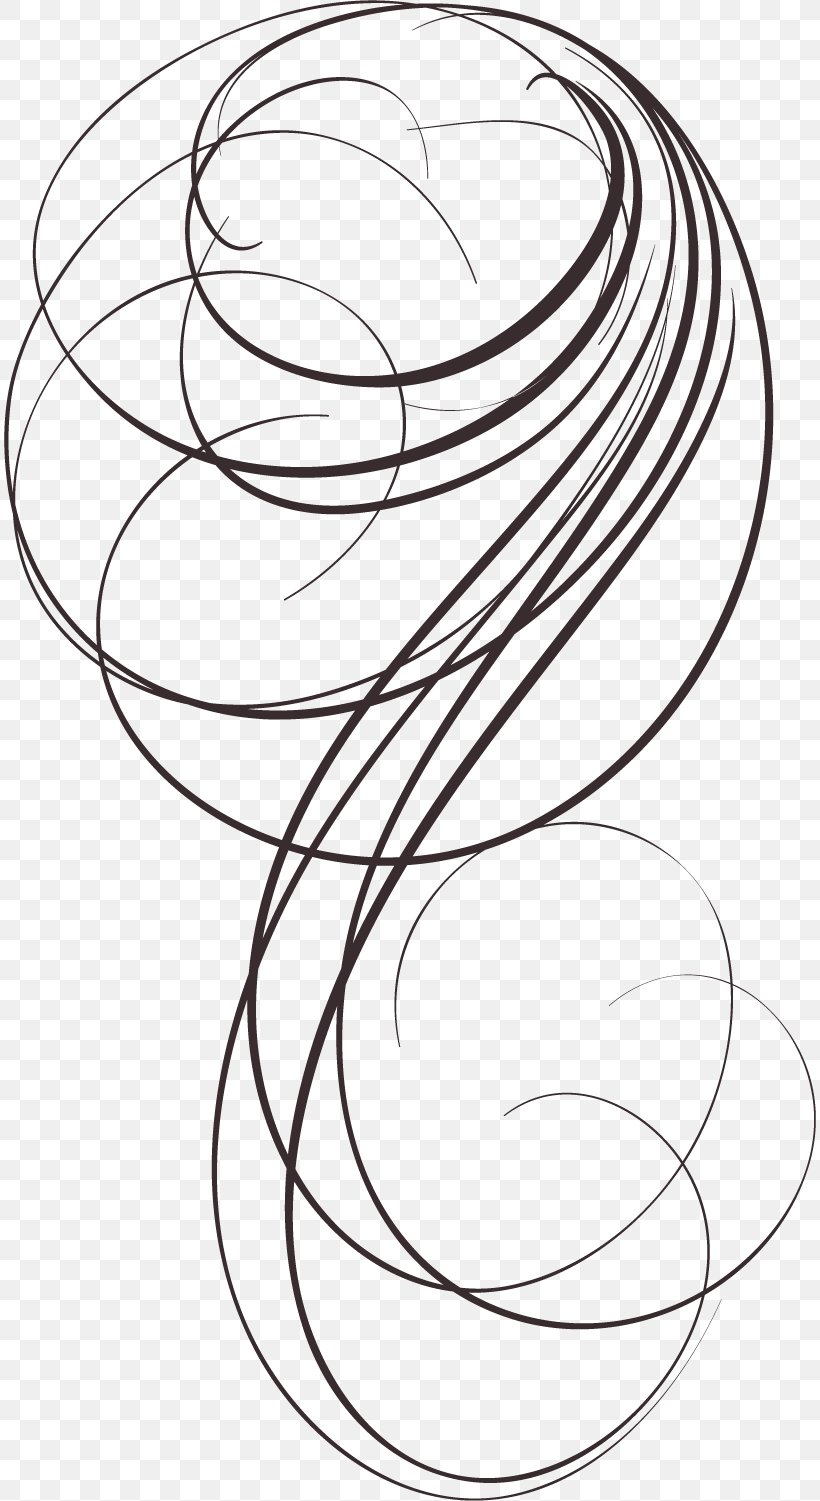 Ornament Digital Image, PNG, 812x1501px, Ornament, Art, Black And White, Digital Image, Drawing Download Free